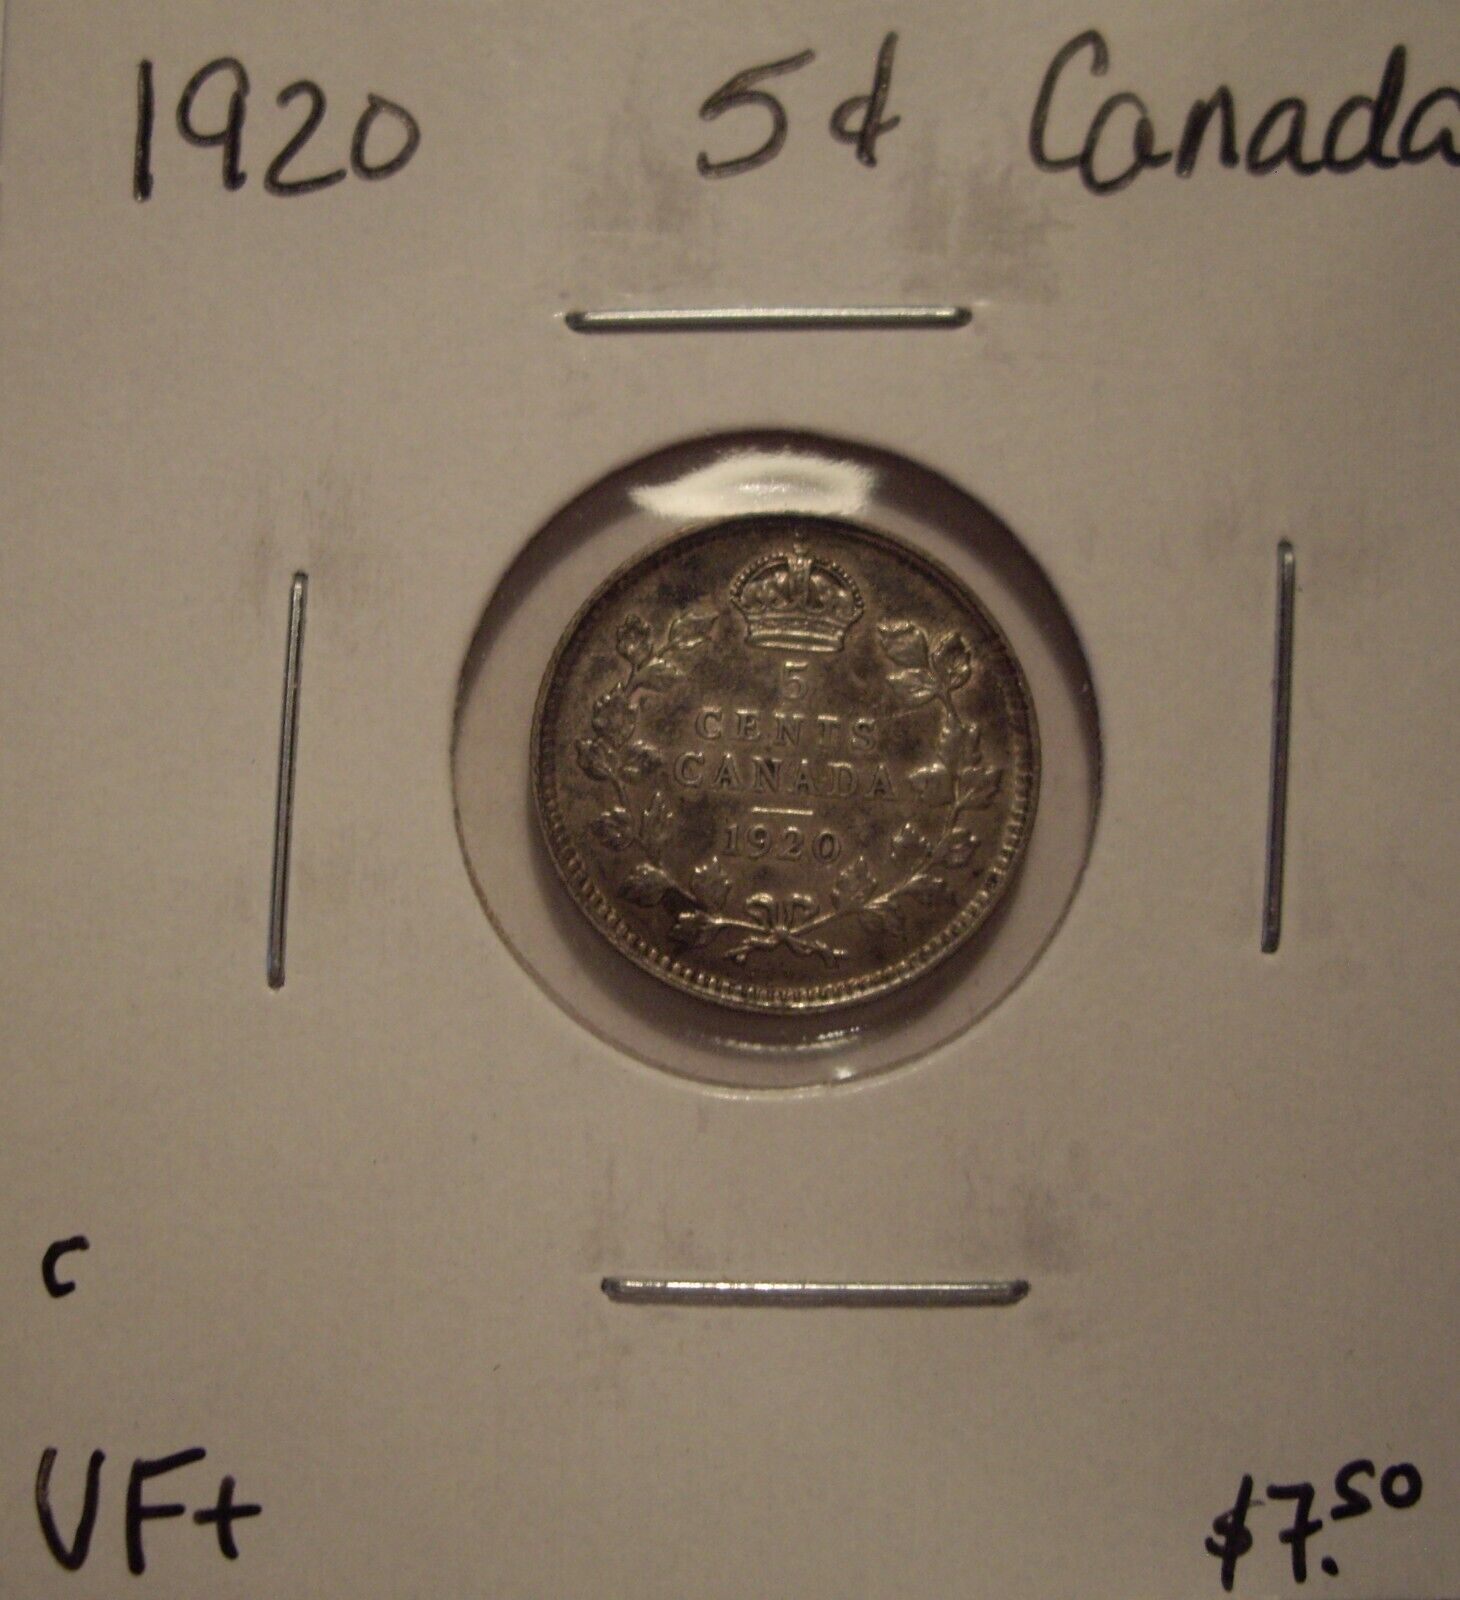 C Canada George V 1920 Silver Five Cents - Vf+